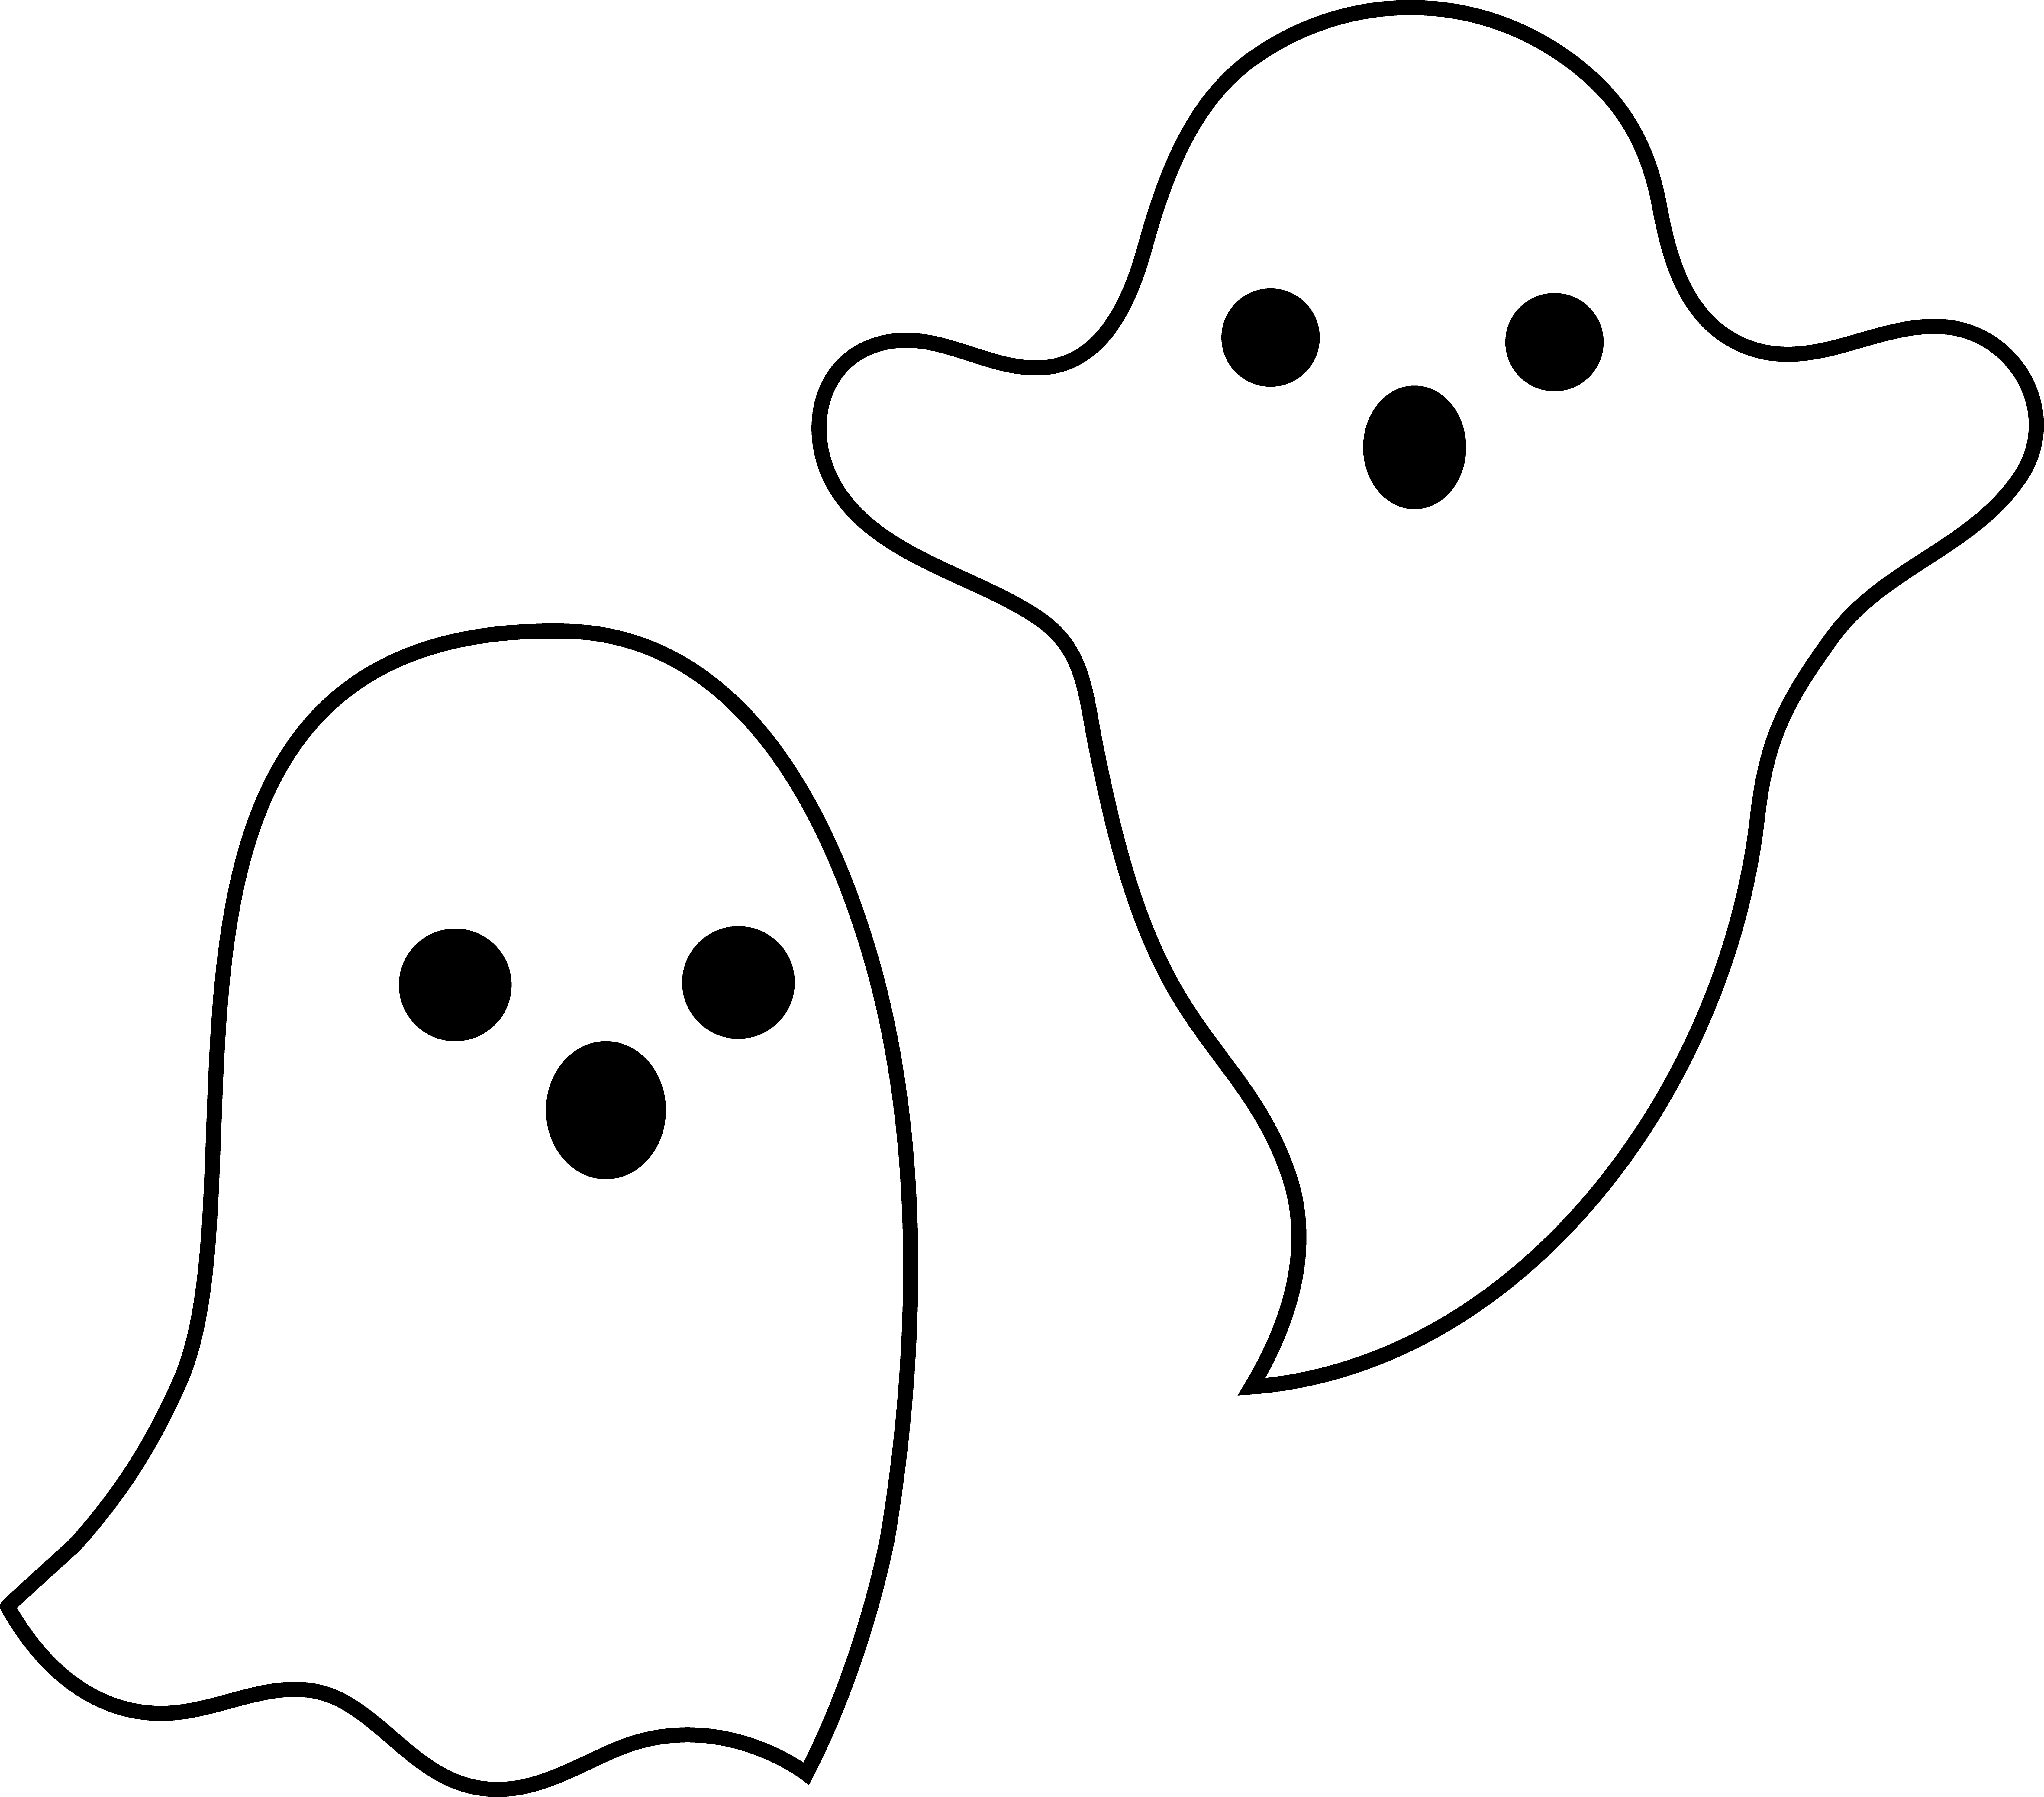 free black and white ghost clipart - photo #38